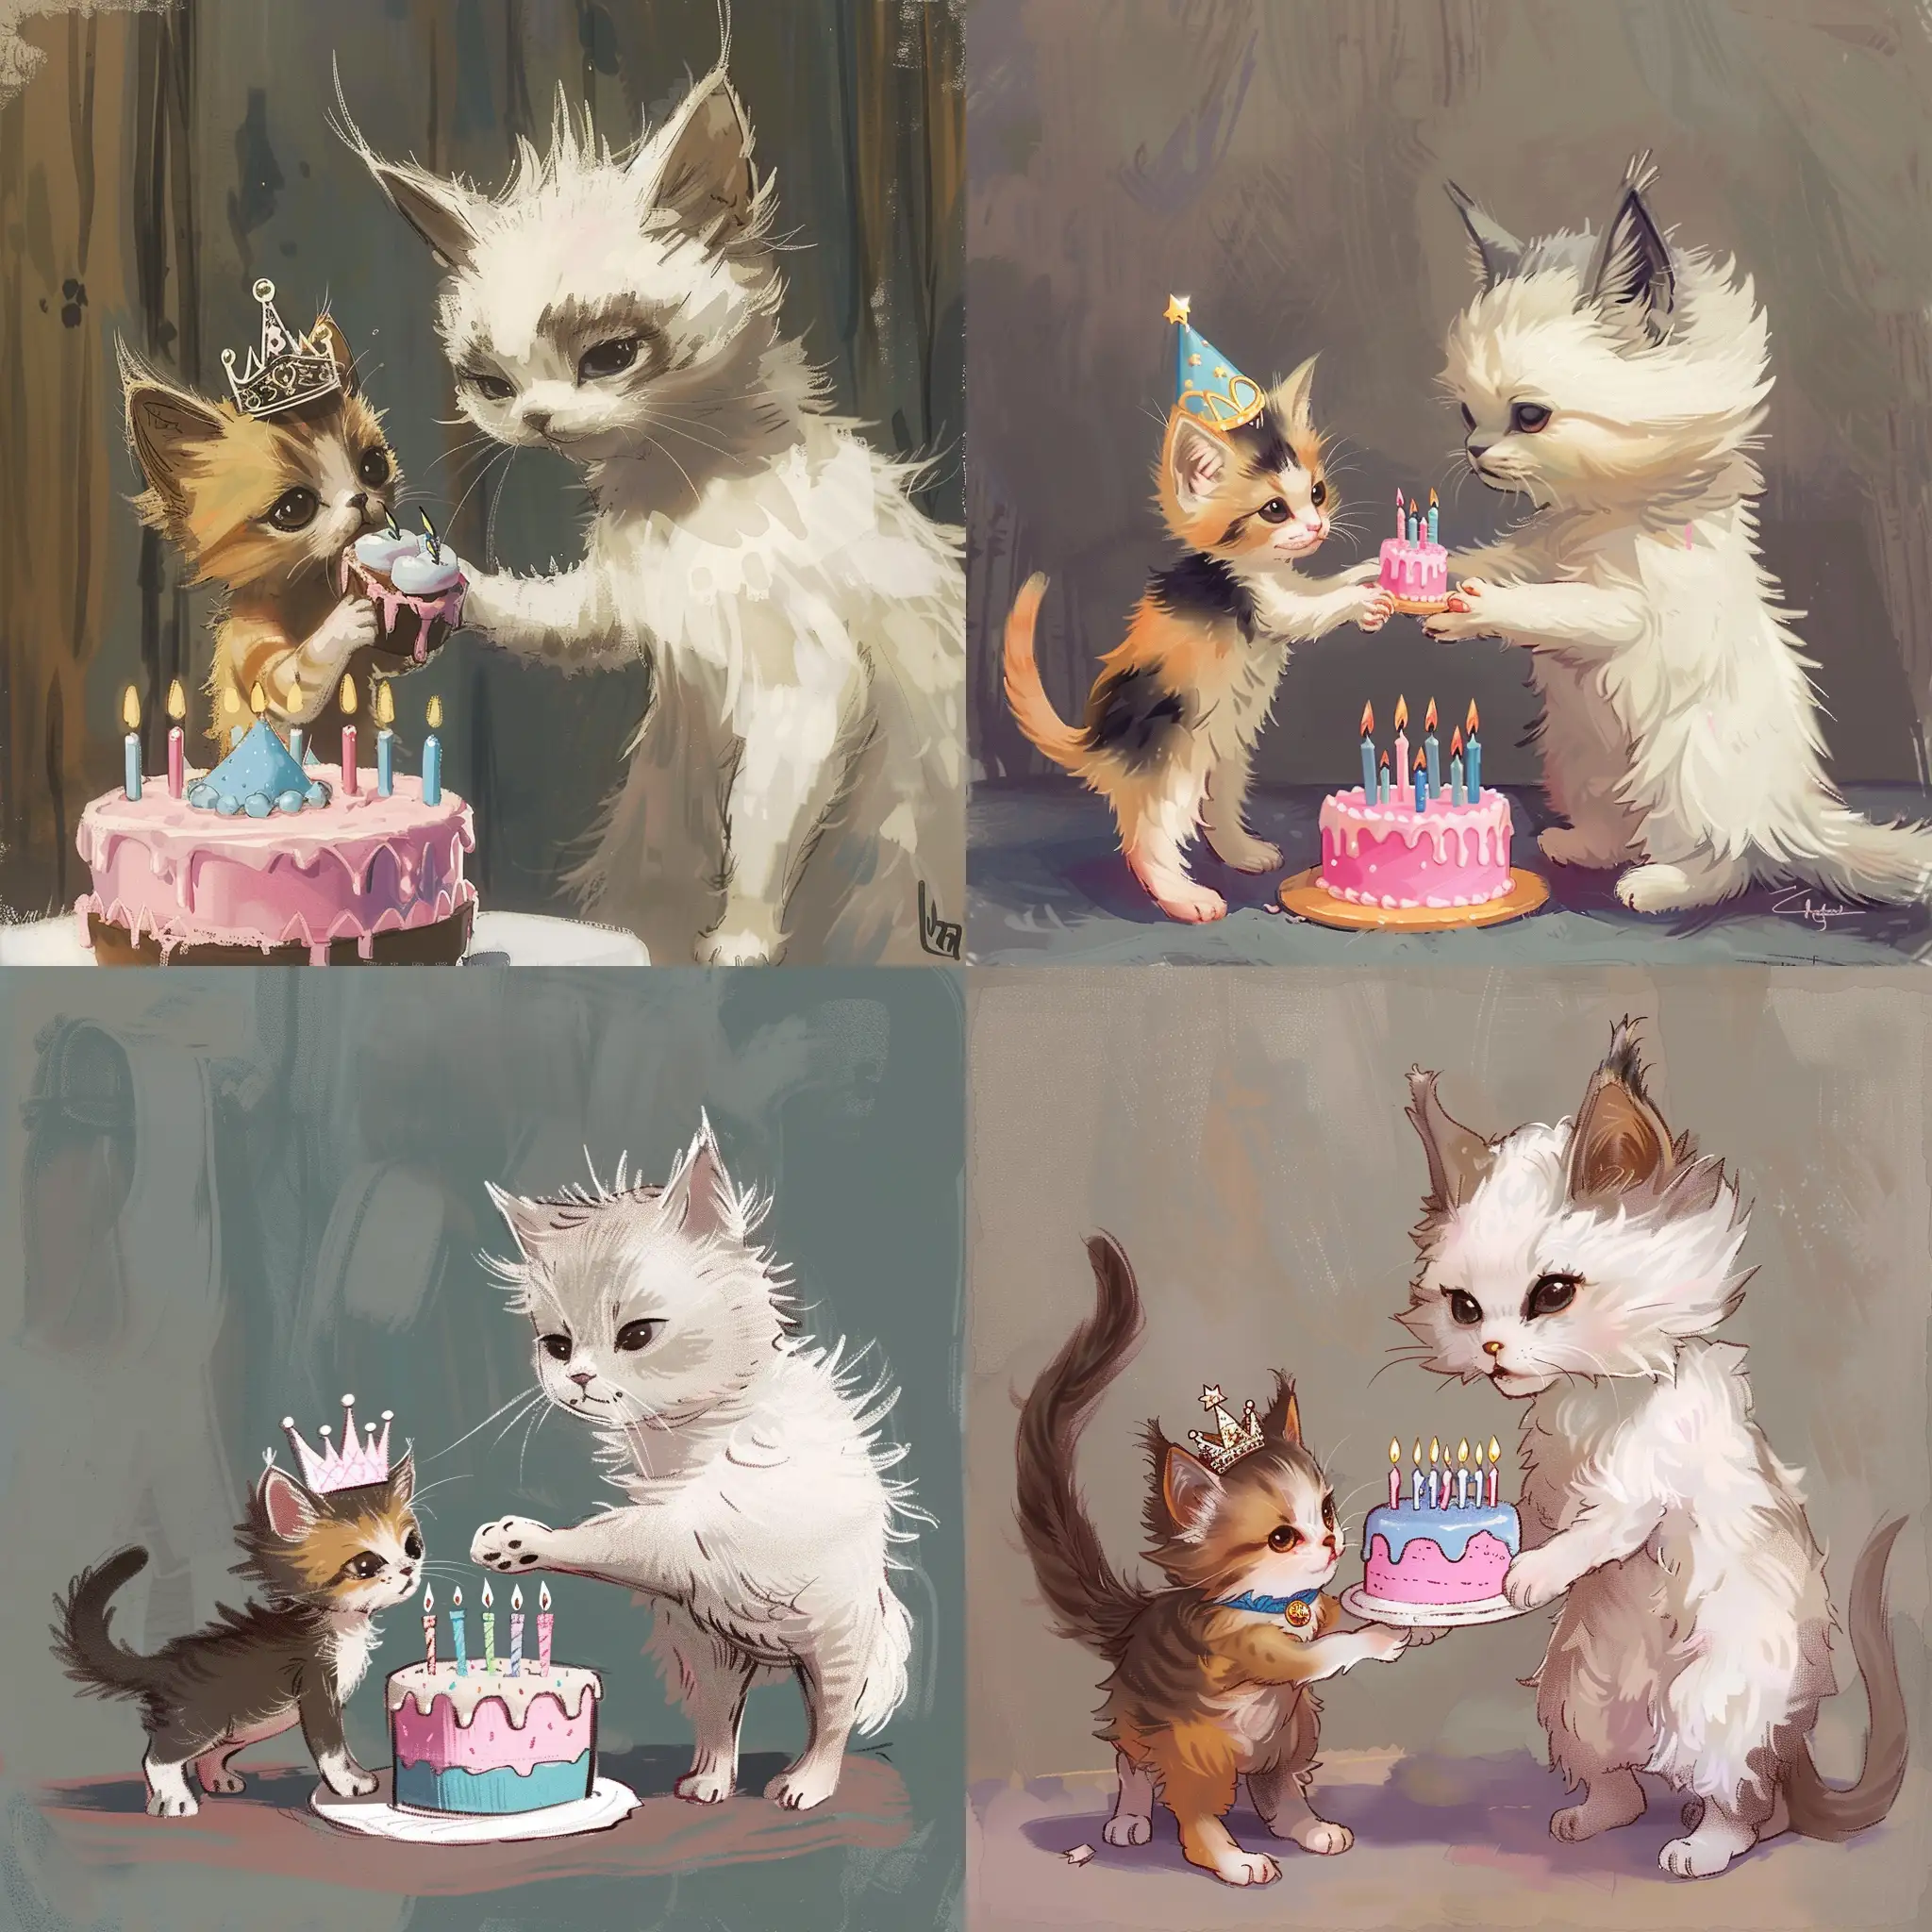 Adorable-Calico-Kitten-Receives-Birthday-Cake-from-Norwegian-Forest-Cat